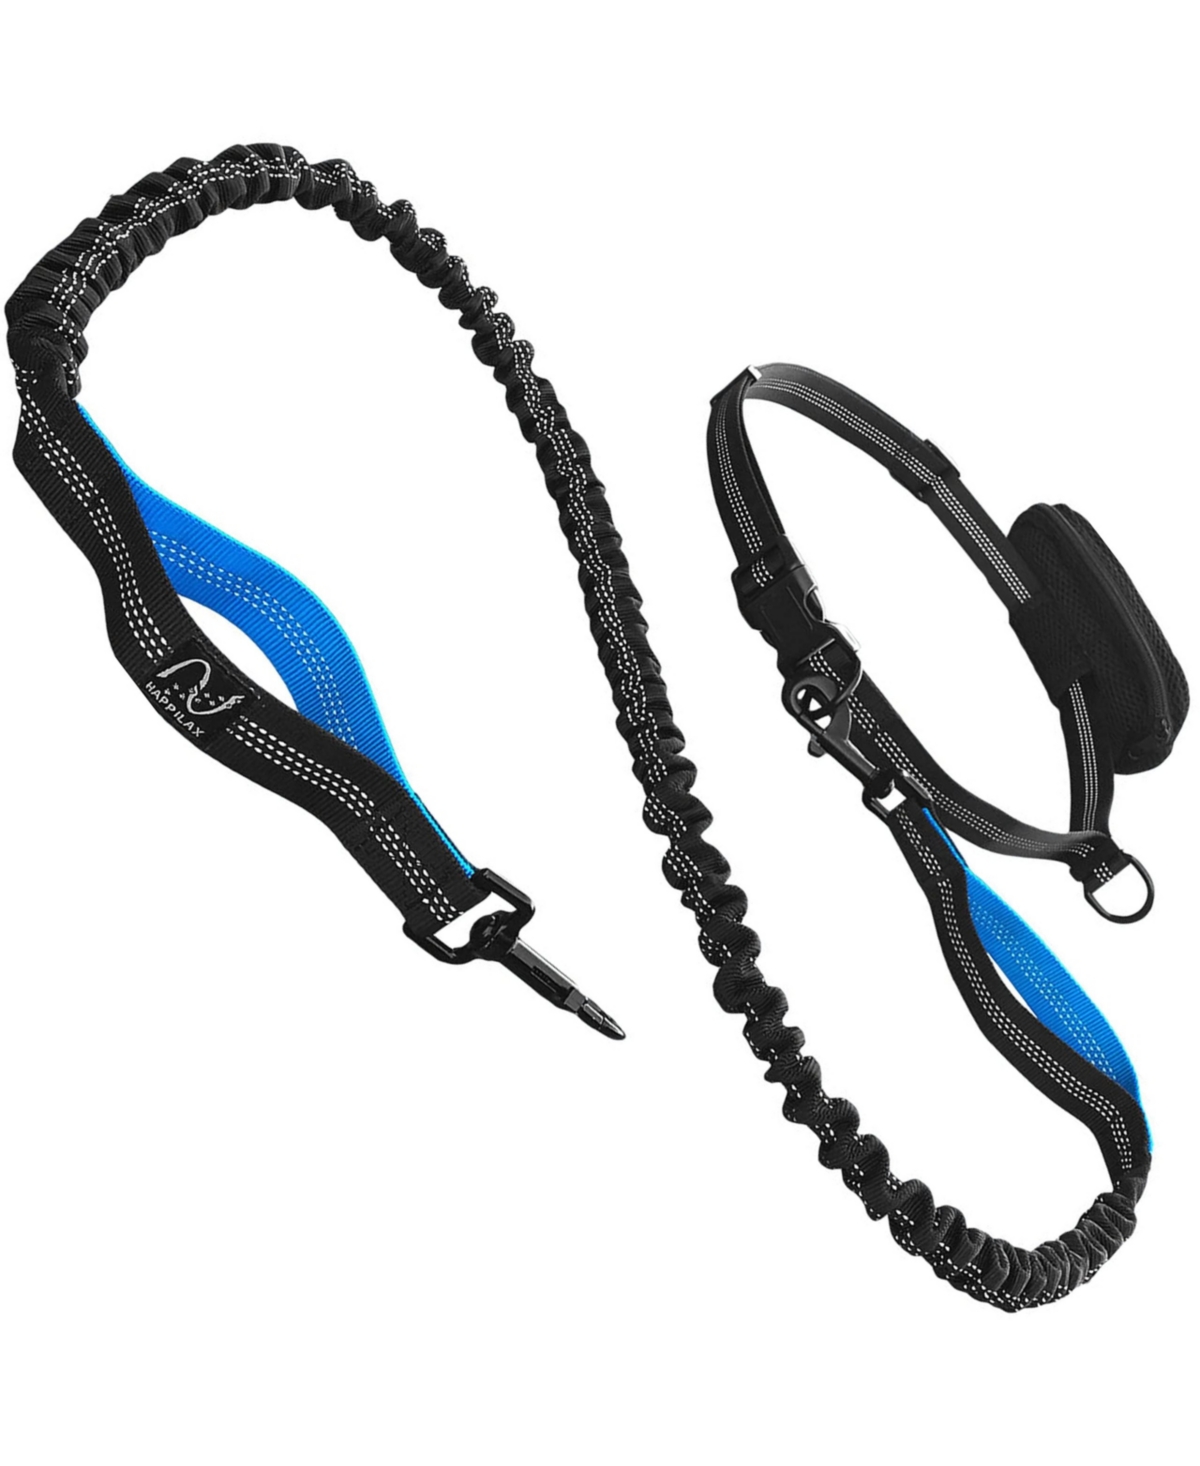 Elastic and Reflective Dog Leash for Jogging with Belly Strap - Black